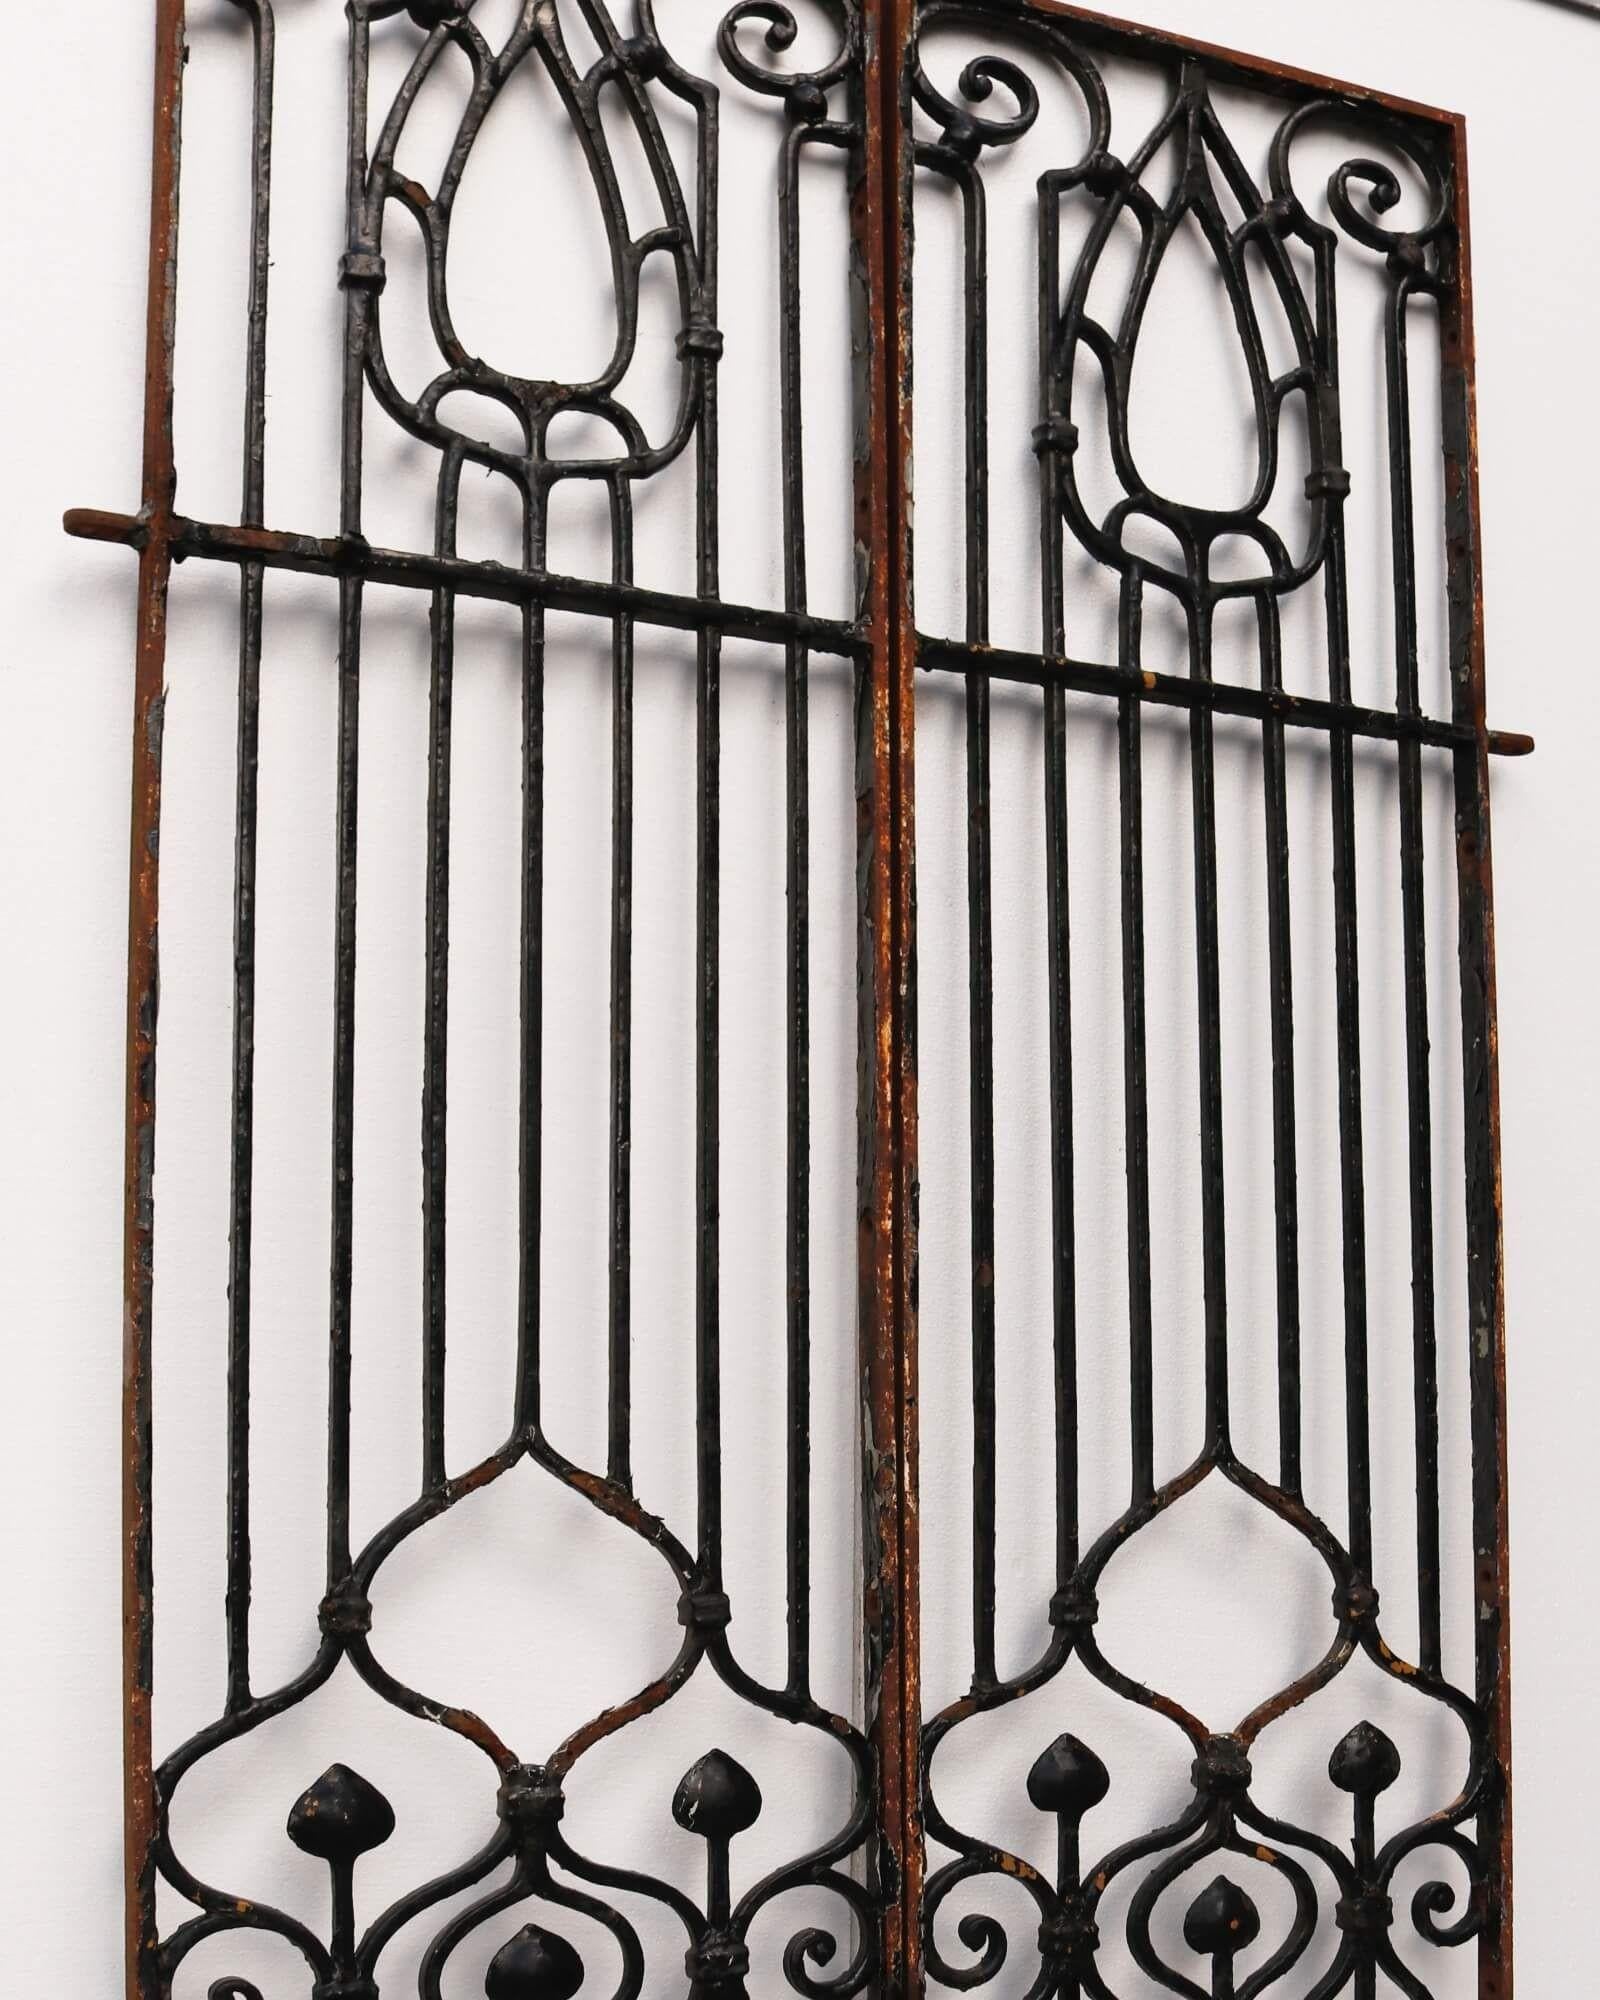 Set of Tall Art Nouveau Wrought Iron Gates In Fair Condition For Sale In Wormelow, Herefordshire